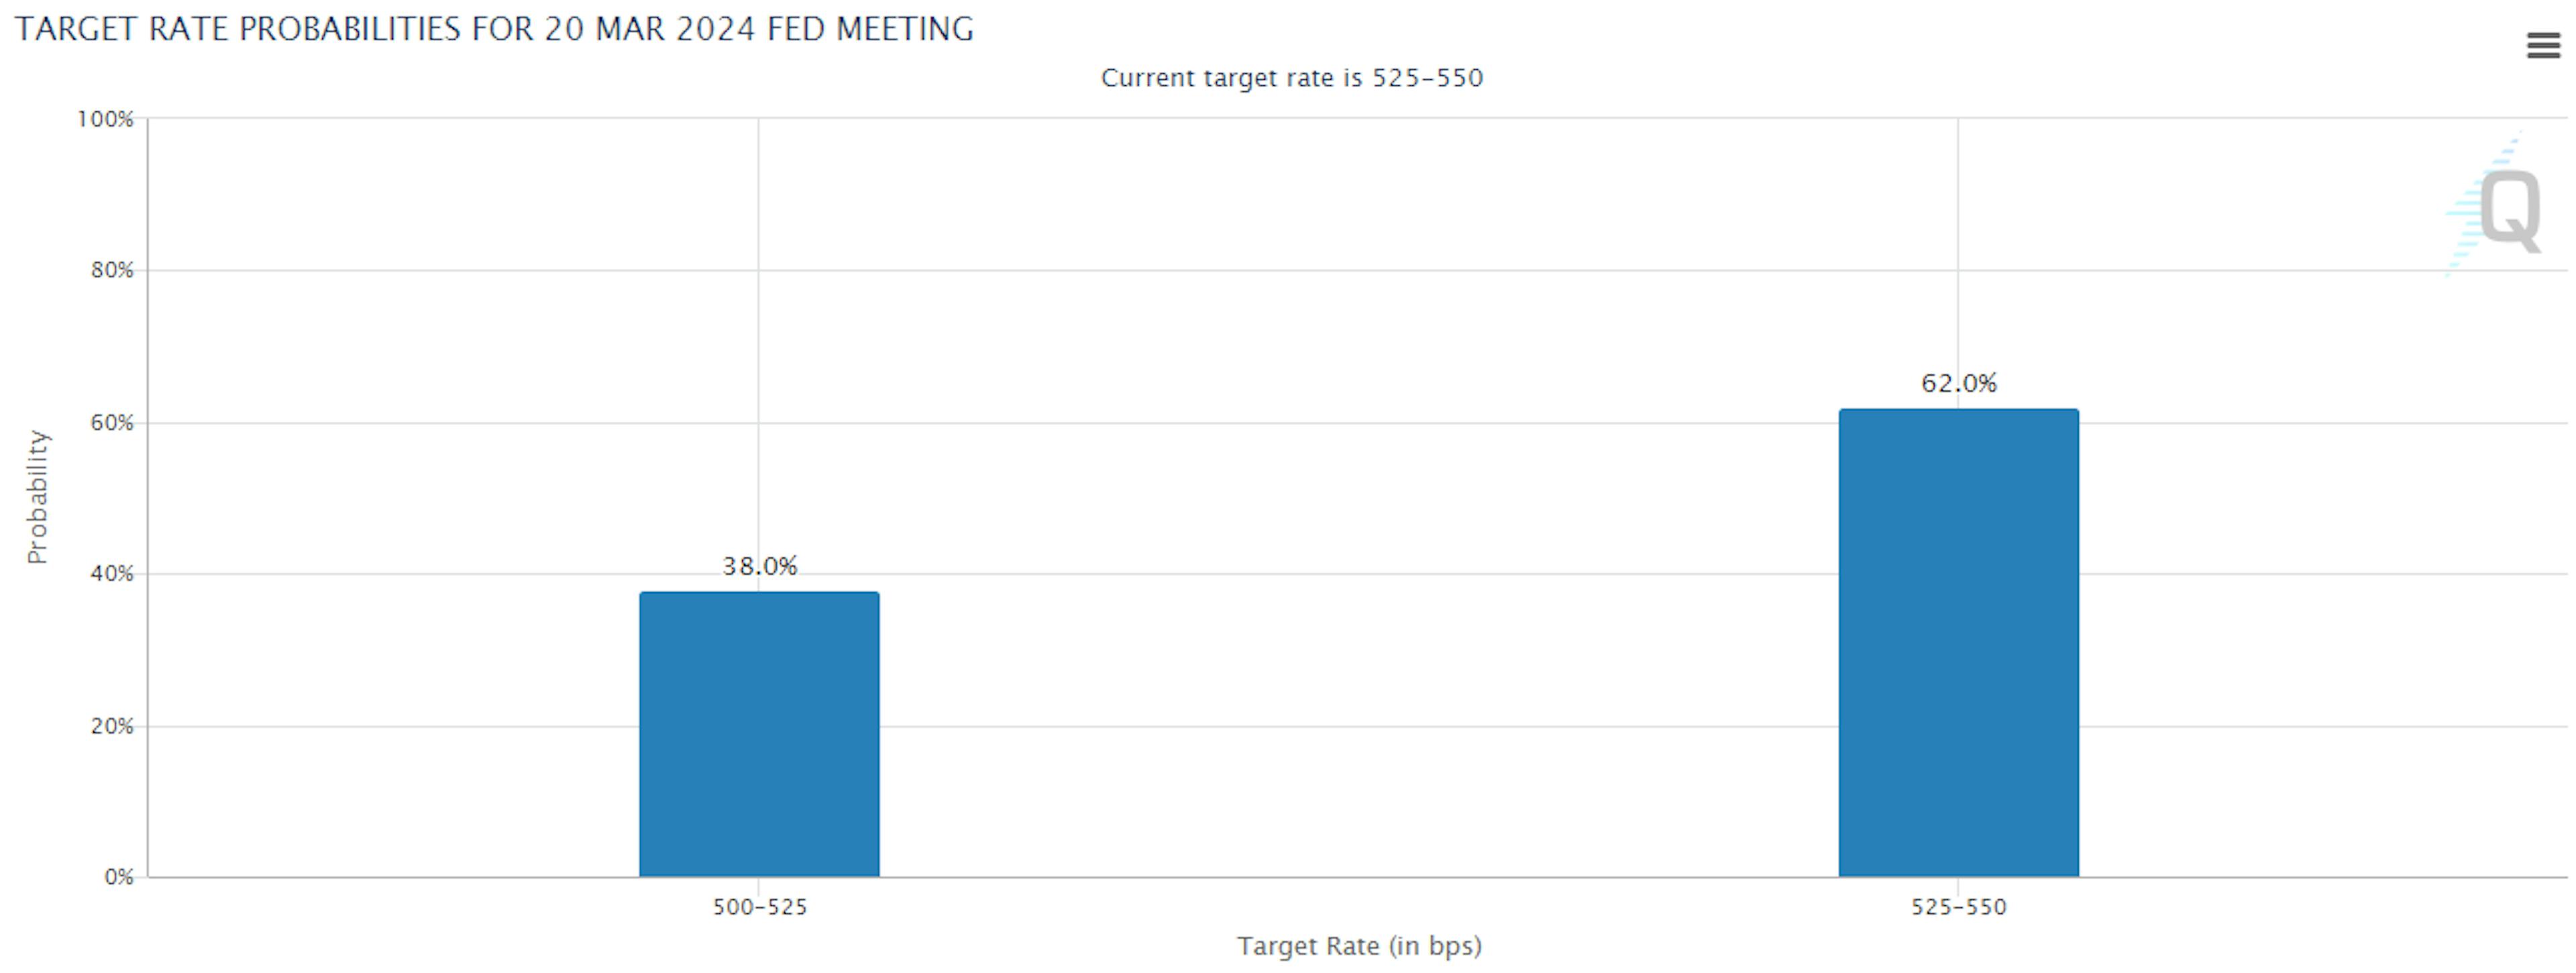 Target rate probabilities for 20 Mar 2024 Fed meeting